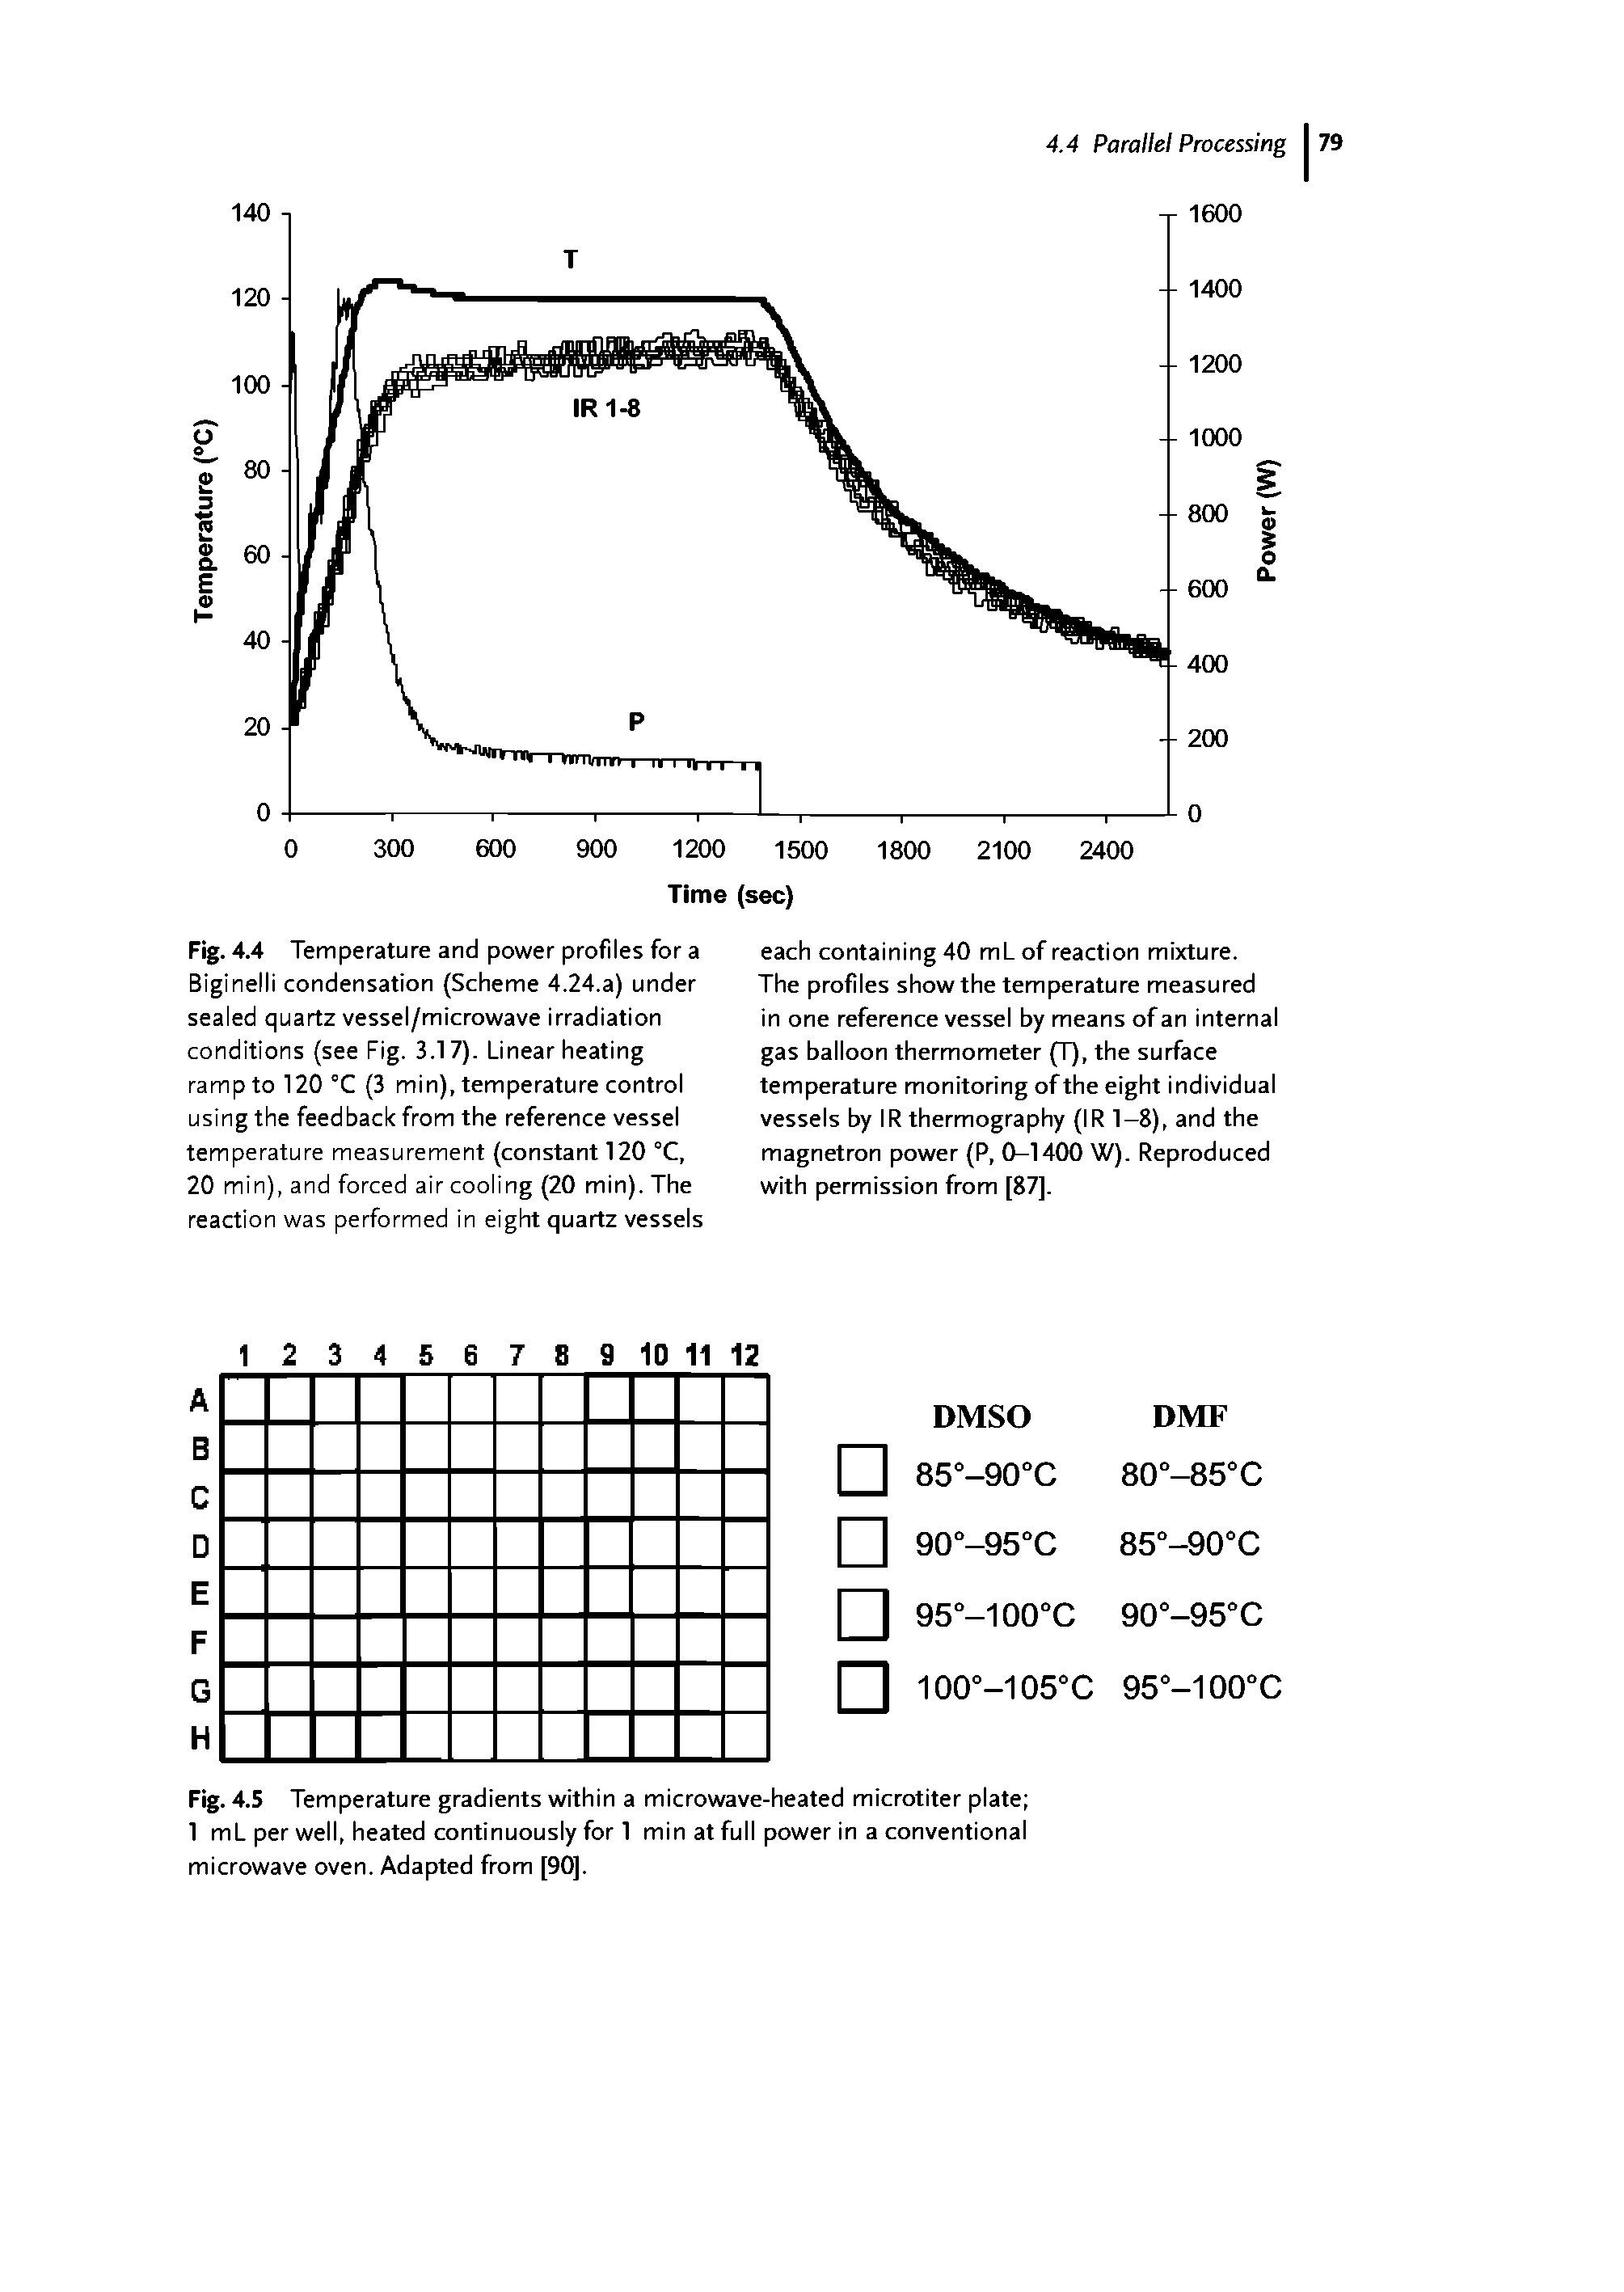 Fig. 4.4 Temperature and power profiles for a Biginelli condensation (Scheme 4.24.a) under sealed quartz vessel/microwave irradiation conditions (see Fig. 3.17). Linear heating ramp to 120 °C (3 min), temperature control using the feedback from the reference vessel temperature measurement (constant 120 °C, 20 min), and forced air cooling (20 min). The reaction was performed in eight quartz vessels...